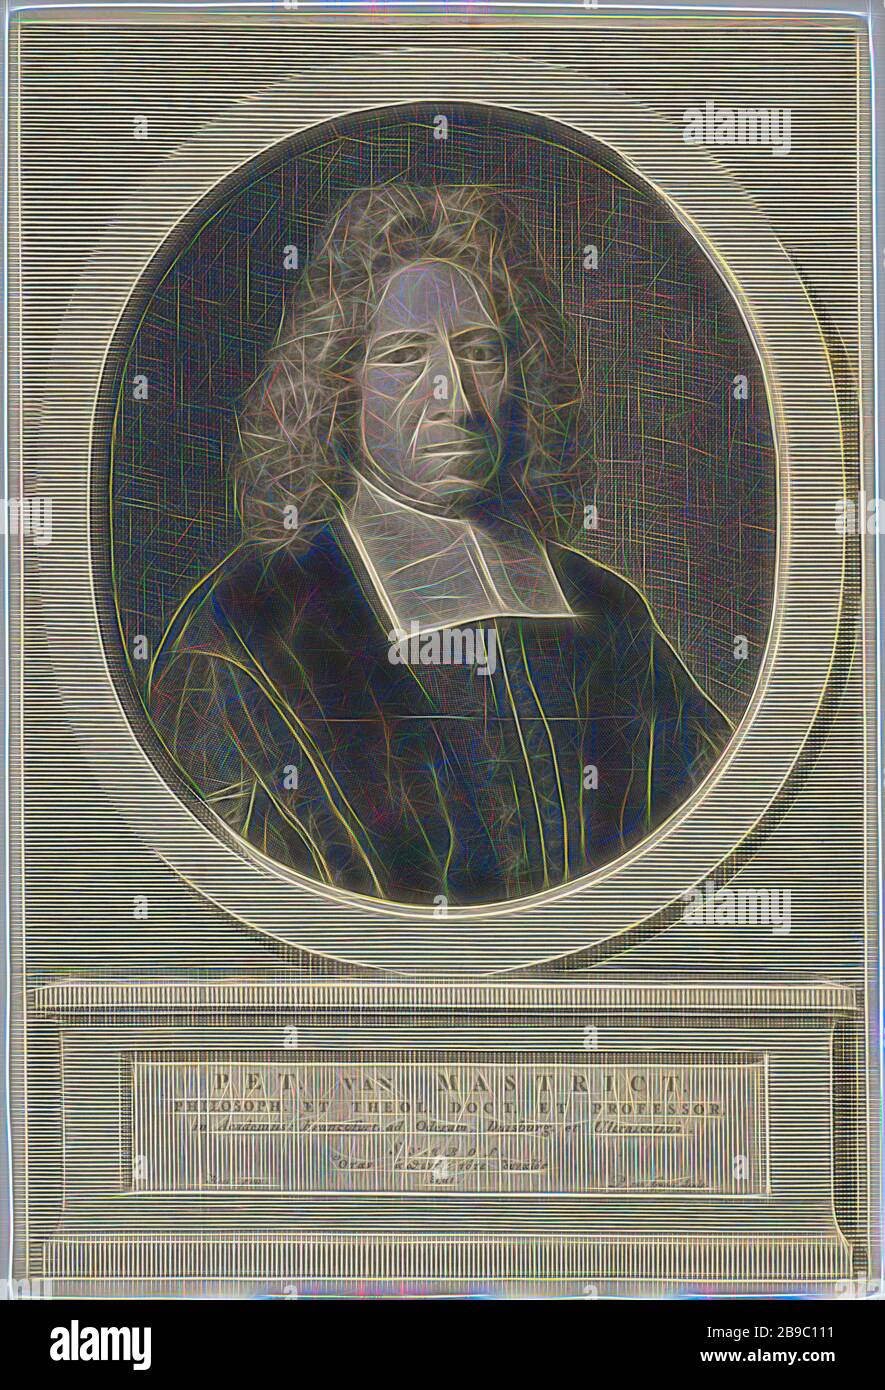 Portrait of Petrus van Maastricht, Petrus van Maastricht, professor of theology and philosophy in Frankfurt, Duisburg and Utrecht. With Latin and Greek captions, Pieter van Gunst (mentioned on object), Amsterdam, 1659 - 1731, paper, engraving, h 280 mm × w 191 mm, Reimagined by Gibon, design of warm cheerful glowing of brightness and light rays radiance. Classic art reinvented with a modern twist. Photography inspired by futurism, embracing dynamic energy of modern technology, movement, speed and revolutionize culture. Stock Photo